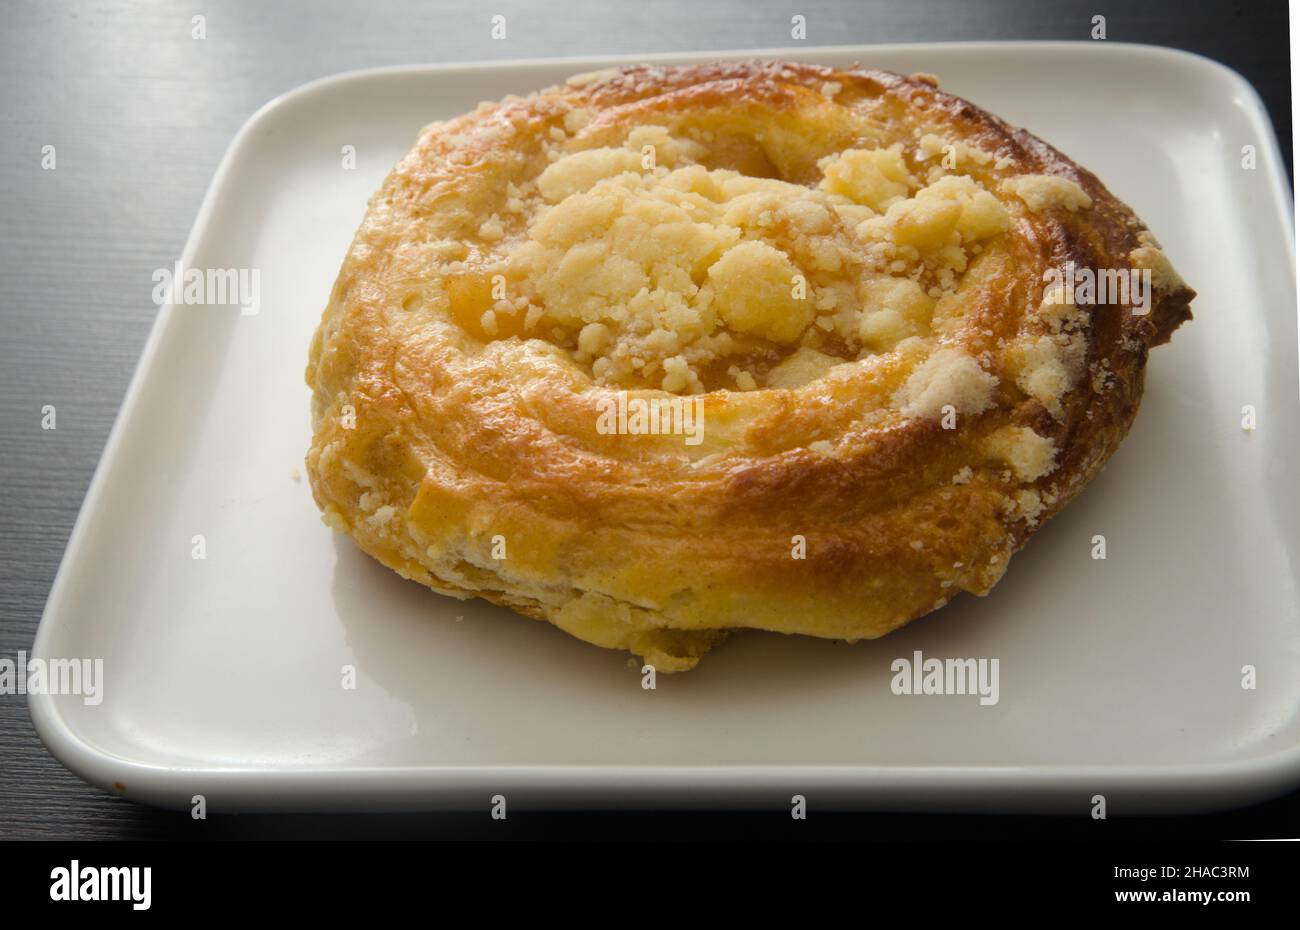 Apple crumb danish on white plate, simplistic concept  one of the necessities of life & enjoyment. Stock Photo